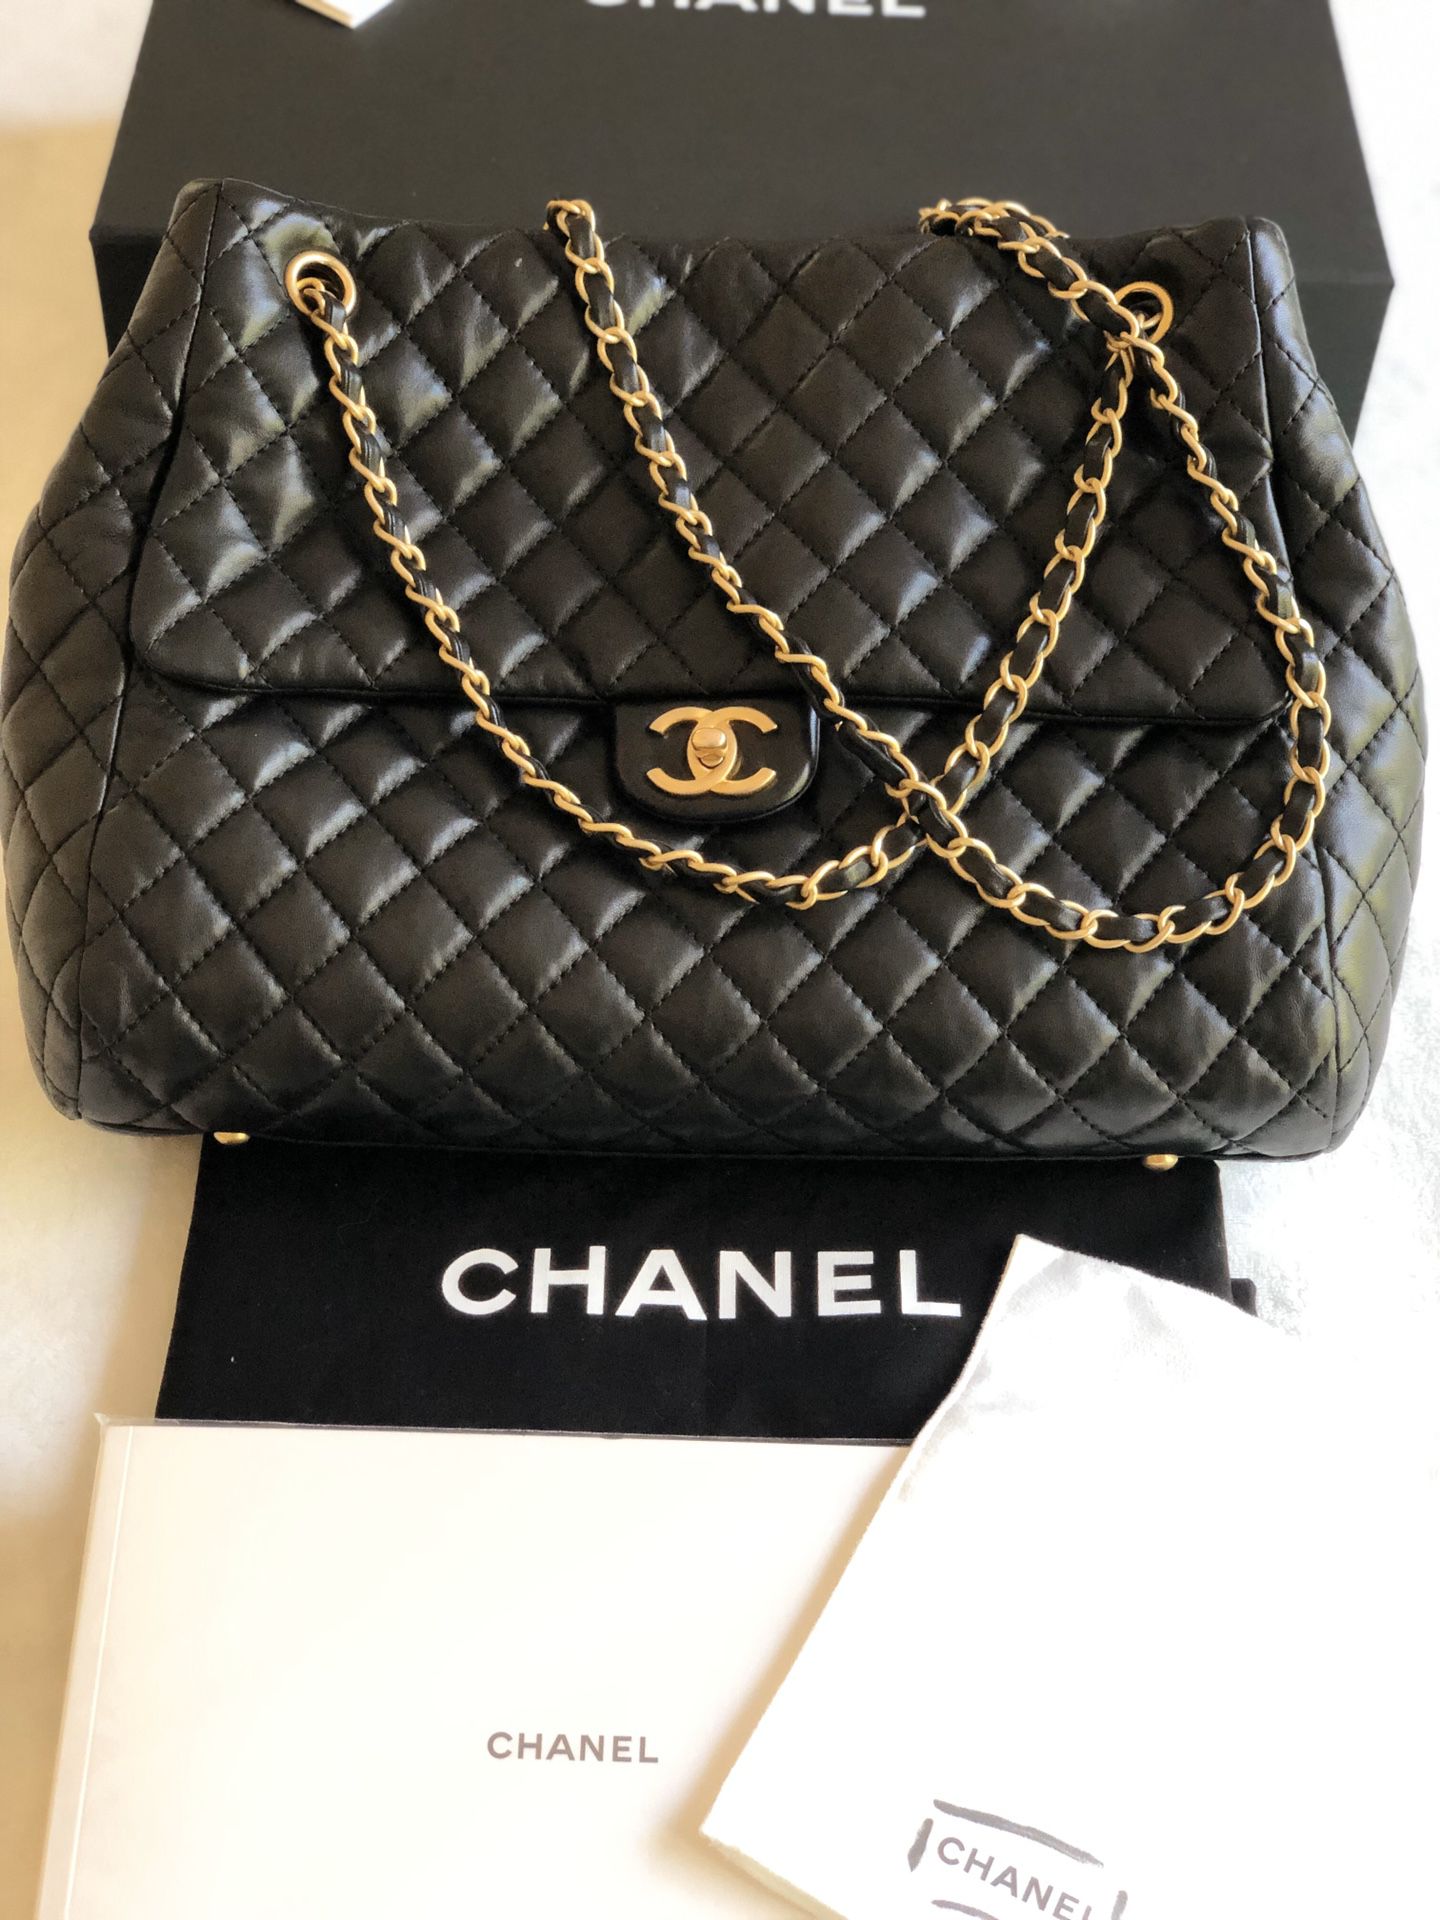 100% Authentic Chanel Large Tote Bag with Gold Hardware